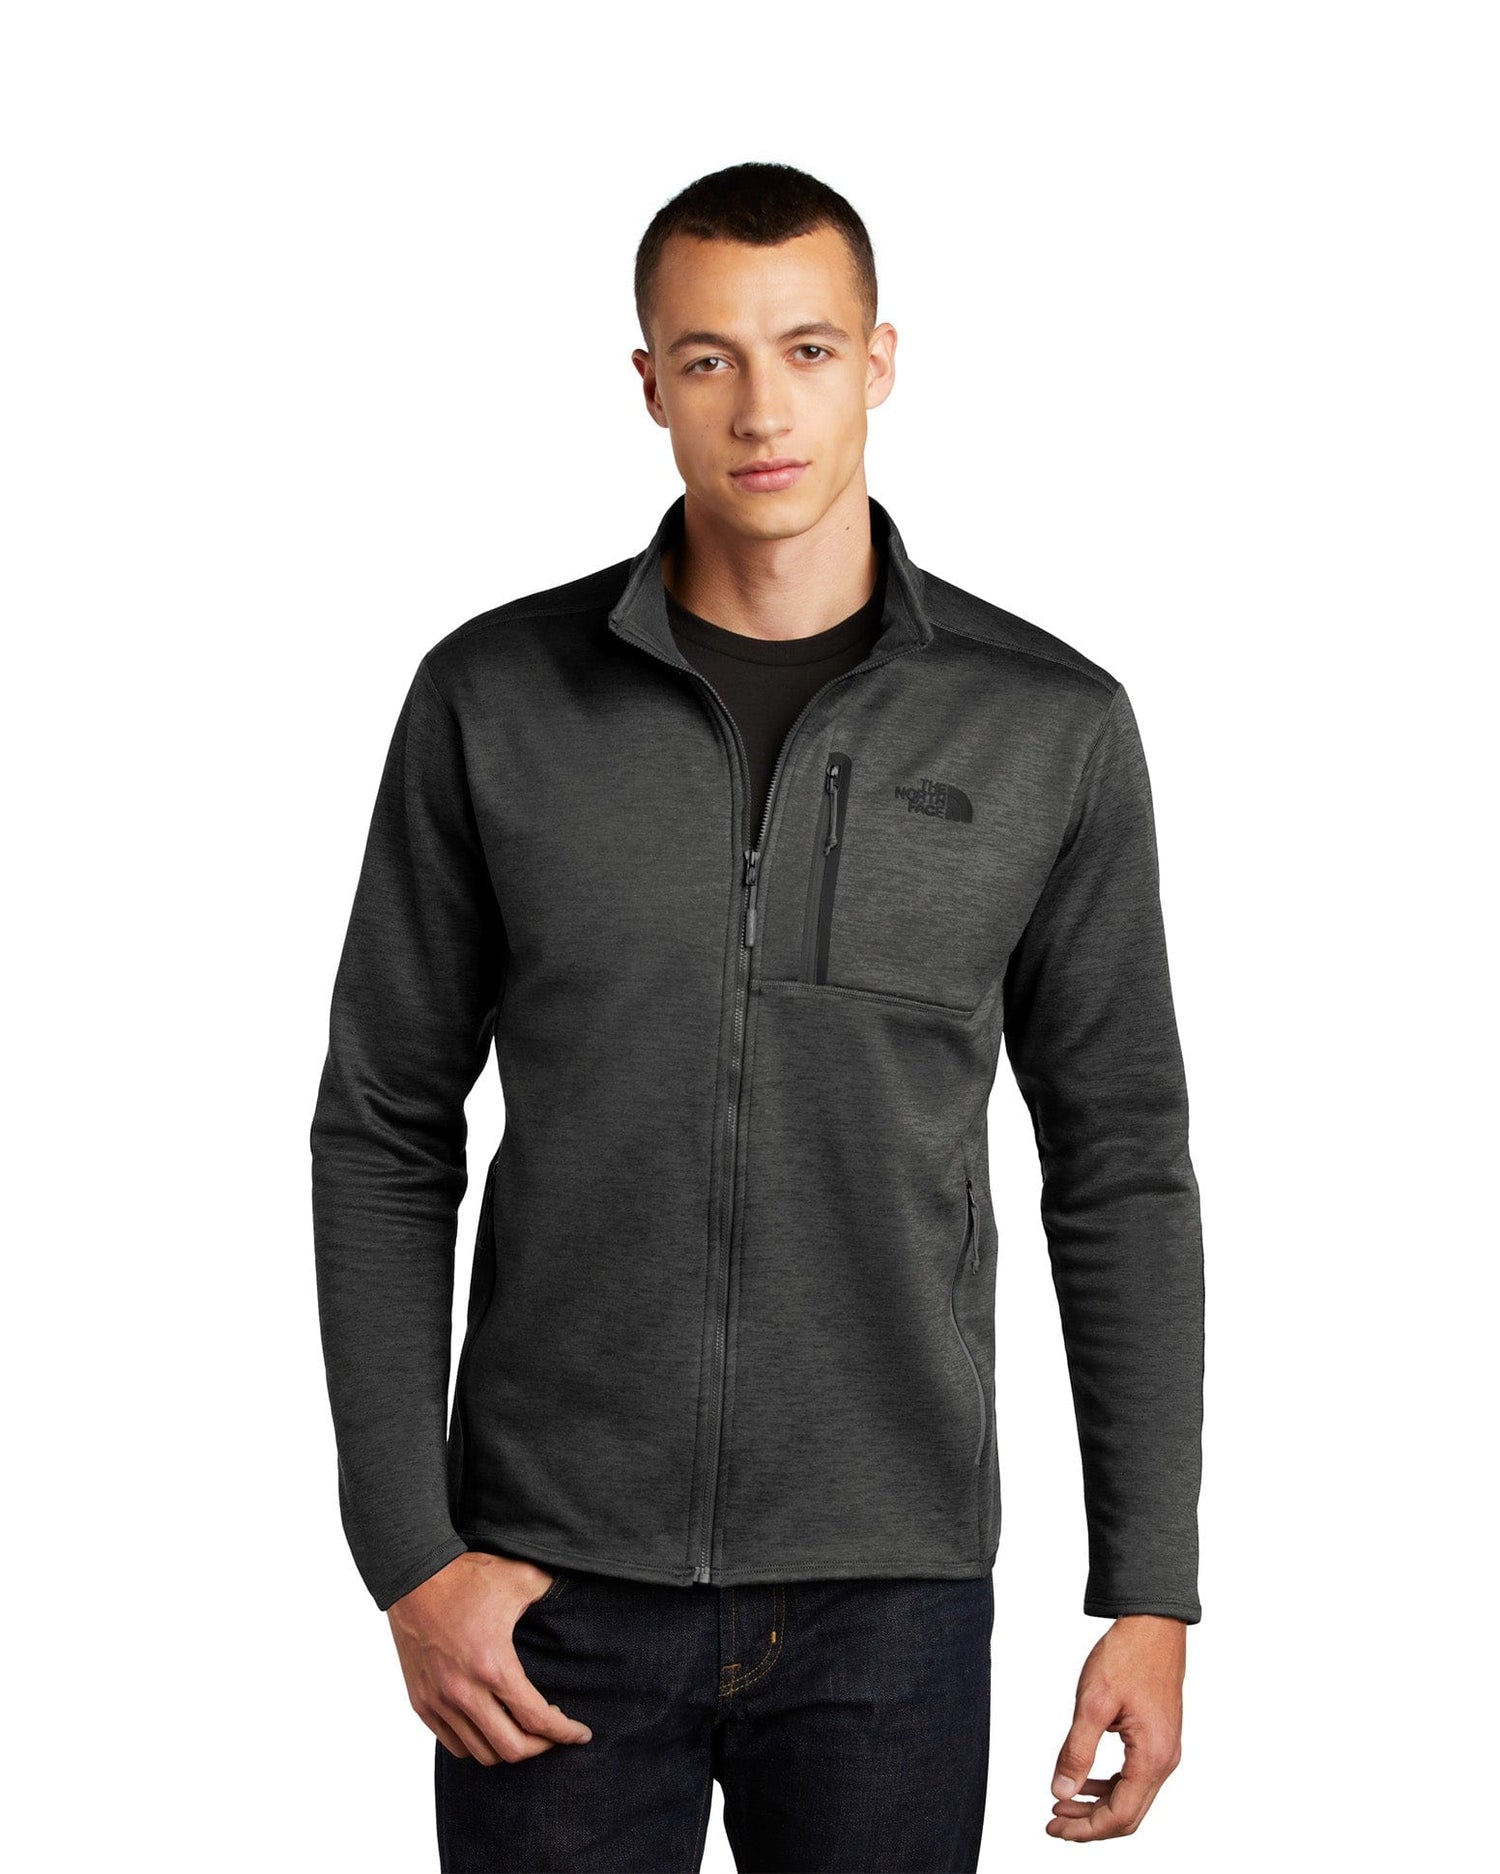 The North Face® Men's Full-Zip Sweater Fleece Jacket - Embroidered  Personalization Available